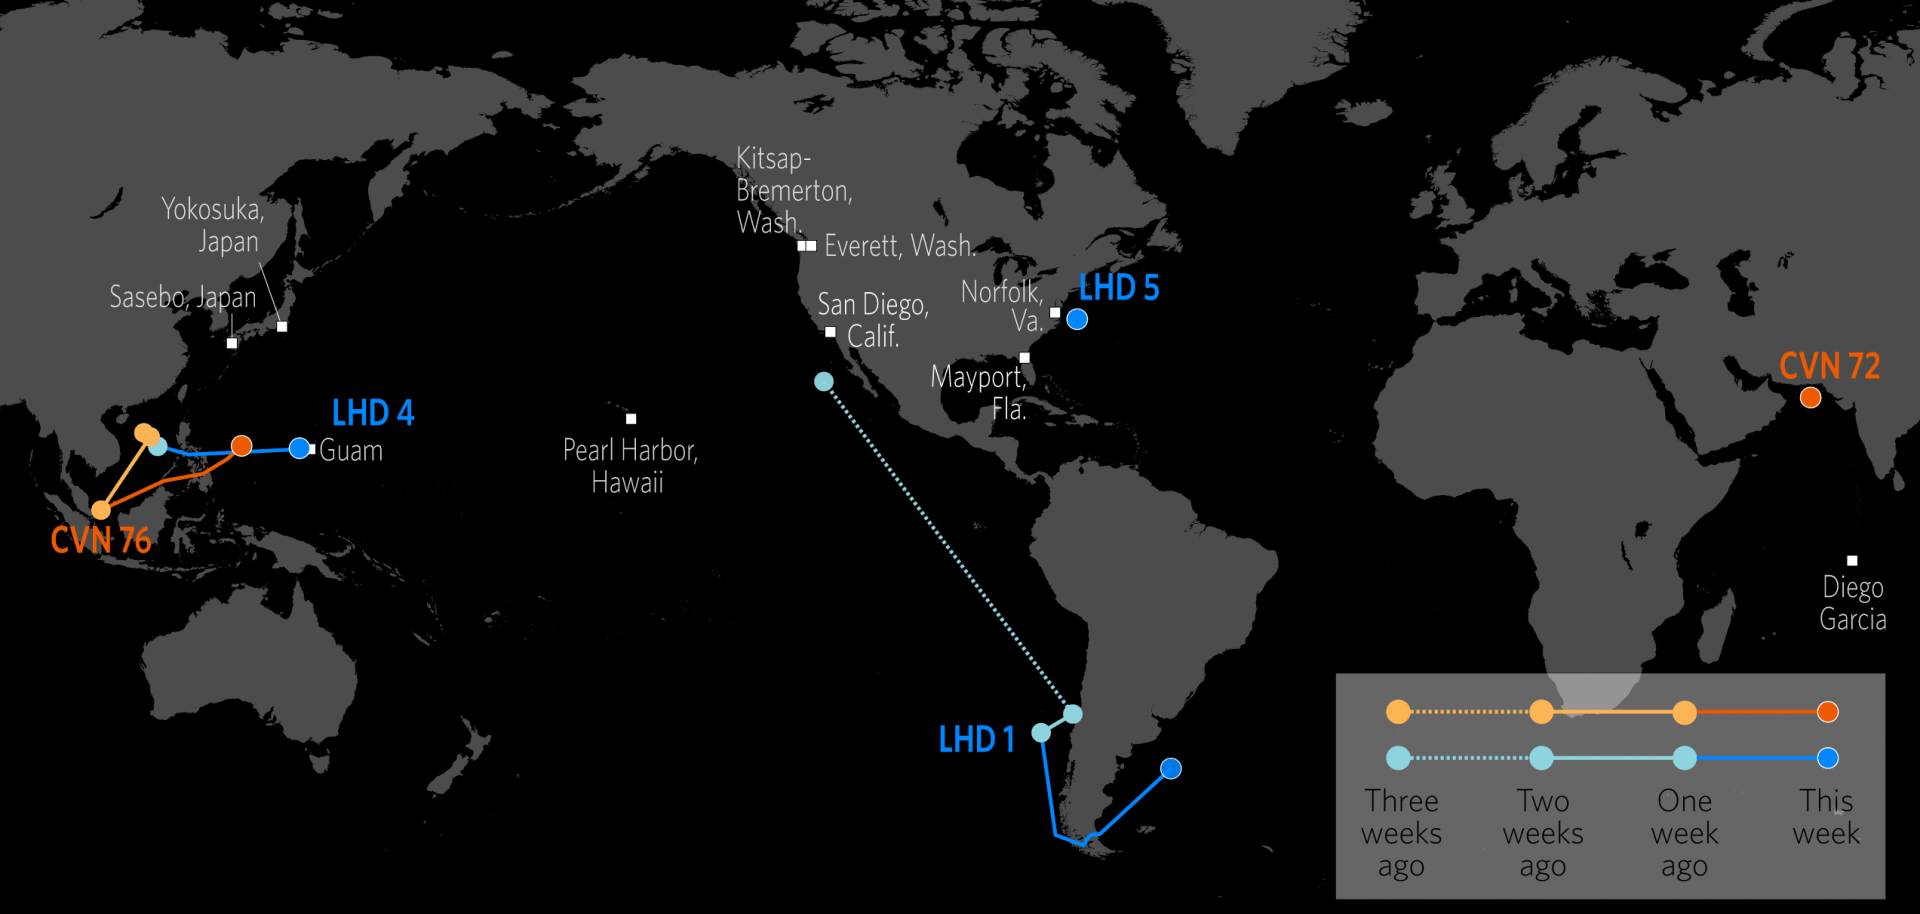 This map shows the approximate locations of U.S. Carrier Strike Groups and Amphibious Ready Groups.